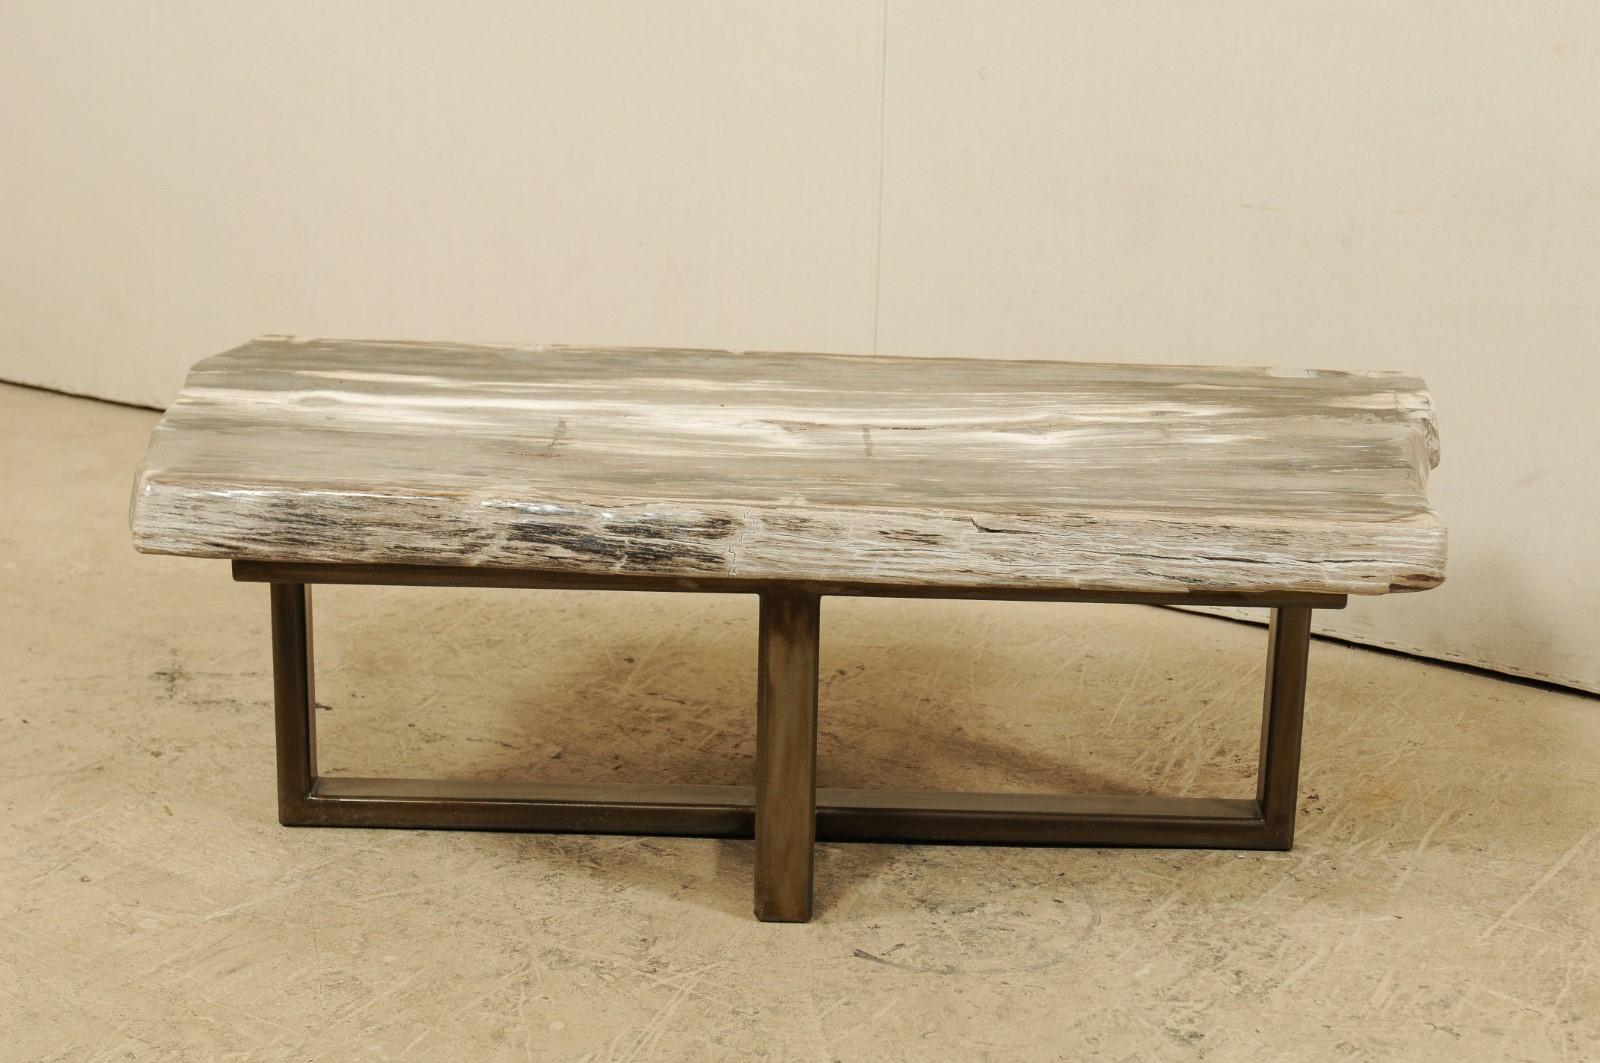 Petrified Wood Slab Bench or Coffee Table with Modern Base (Geschnitzt)